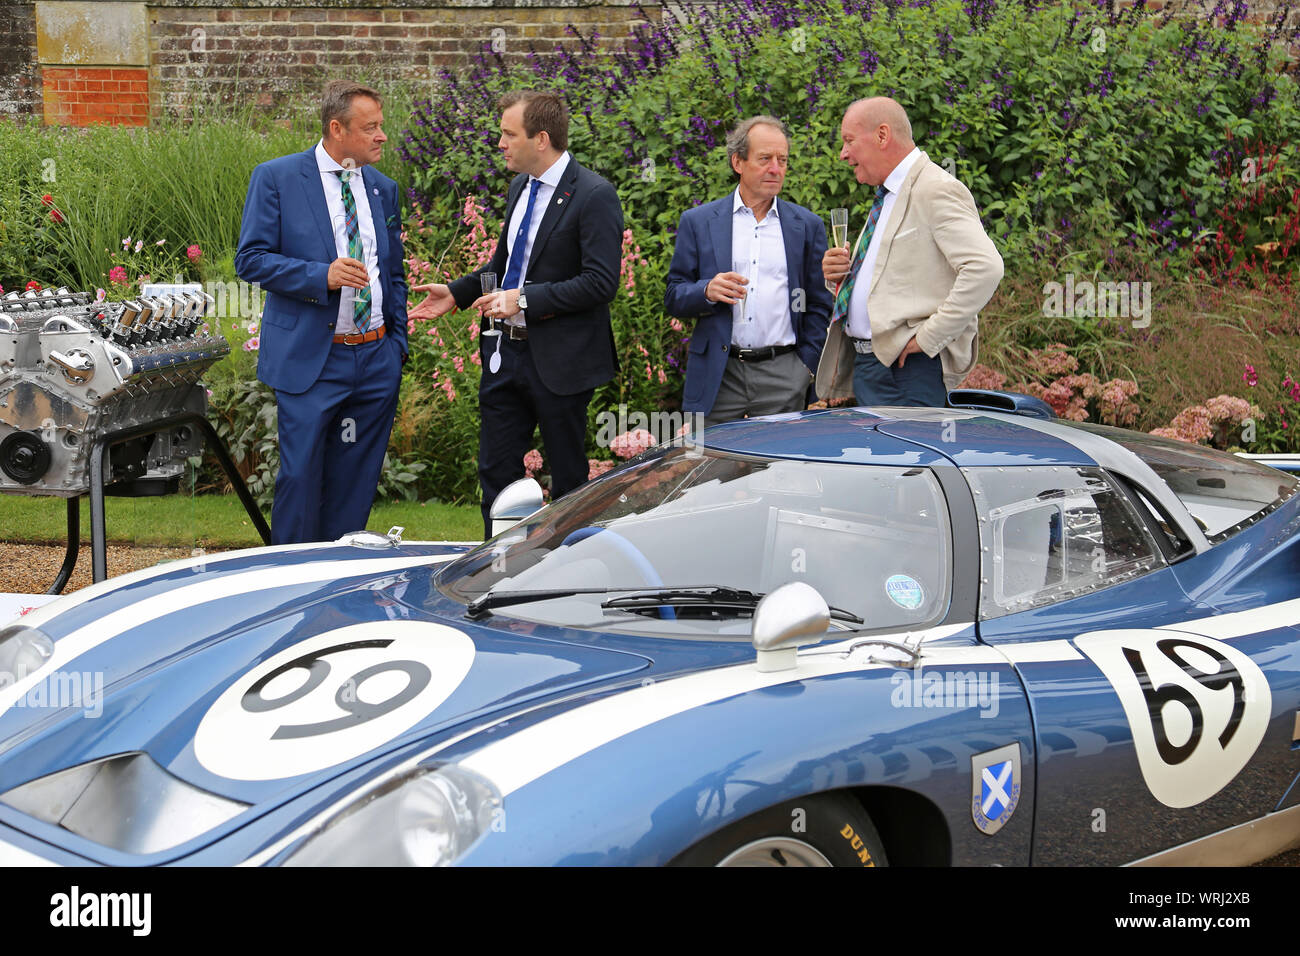 Launch of Ecurie Ecosse LM69 prototype, Concours of Elegance 2019, Hampton Court Palace, East Molesey, Surrey, England, UK, Europe Stock Photo